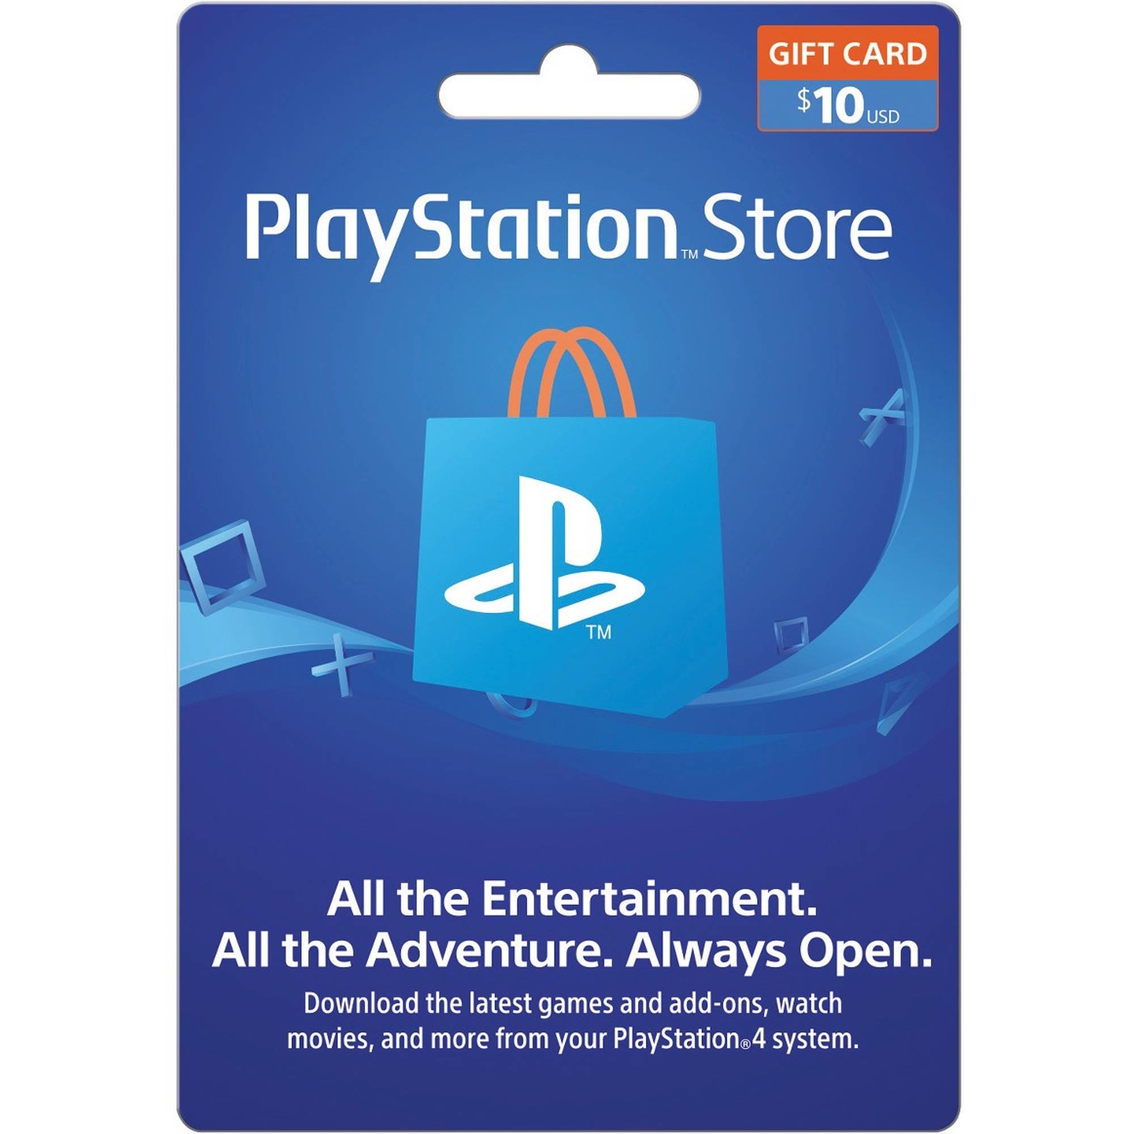 Sony Playstation Store $10 Gift Card, Music & Gaming, Food & Gifts